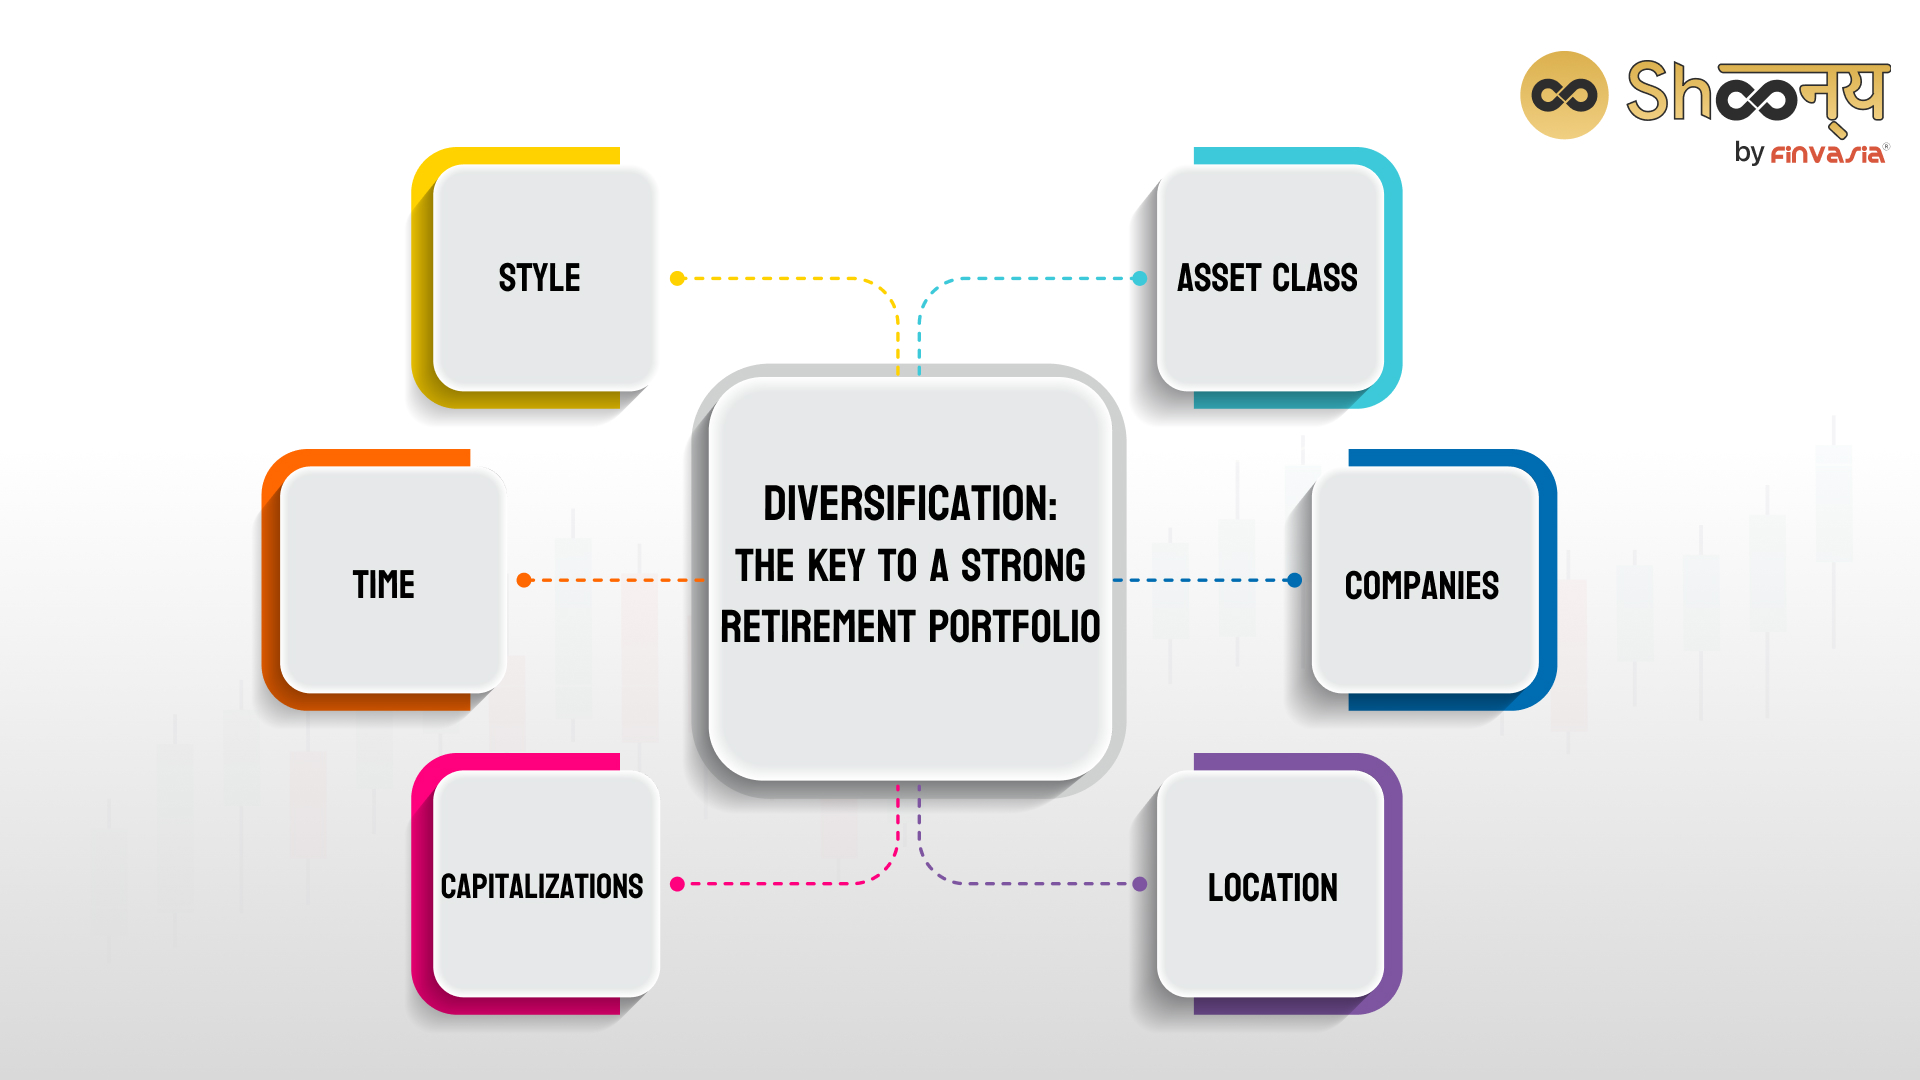 Diversification: The Key to a Strong Retirement Portfolio